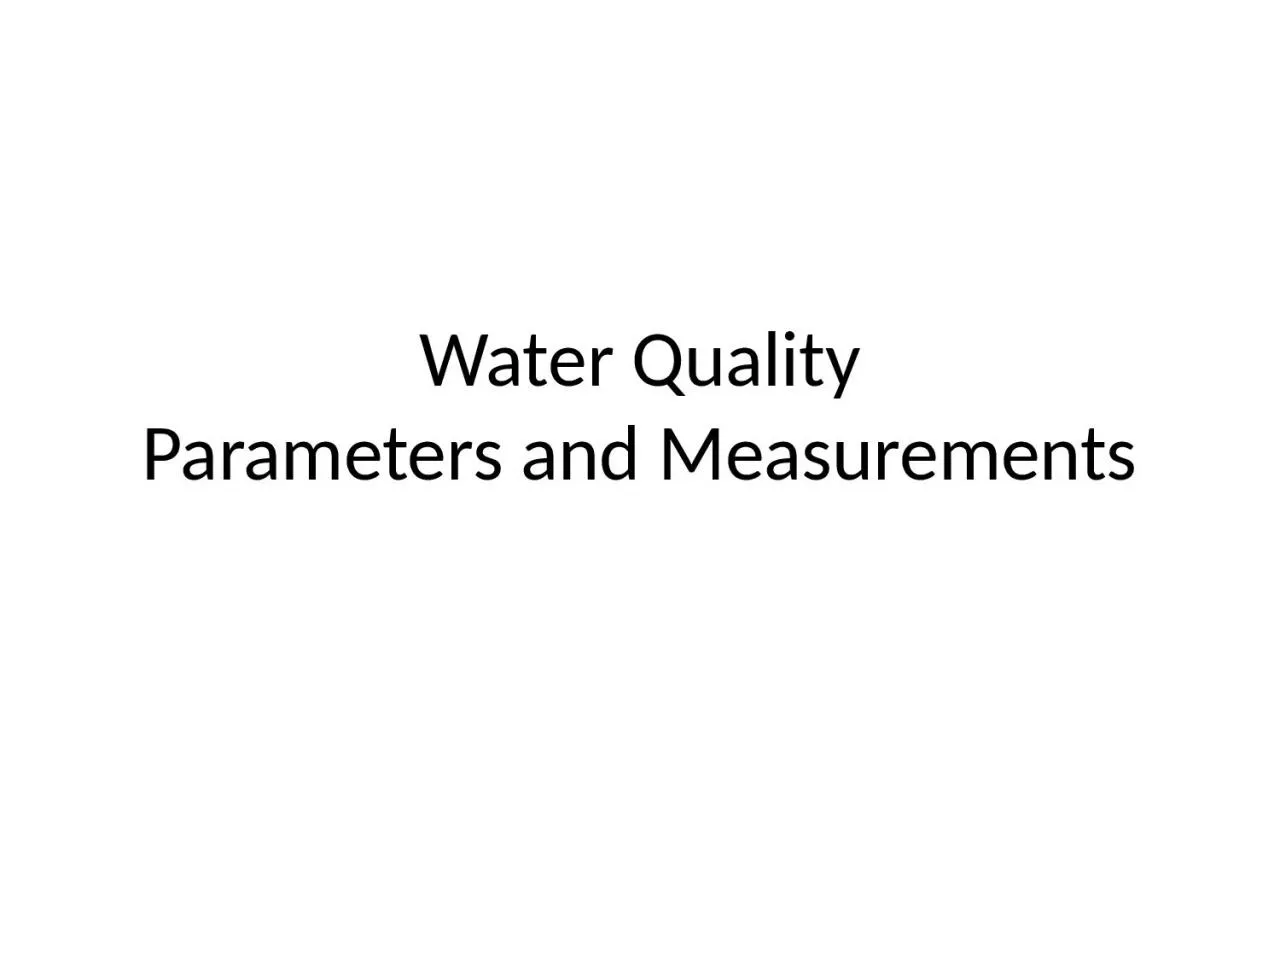 Water Quality Parameters and Measurements